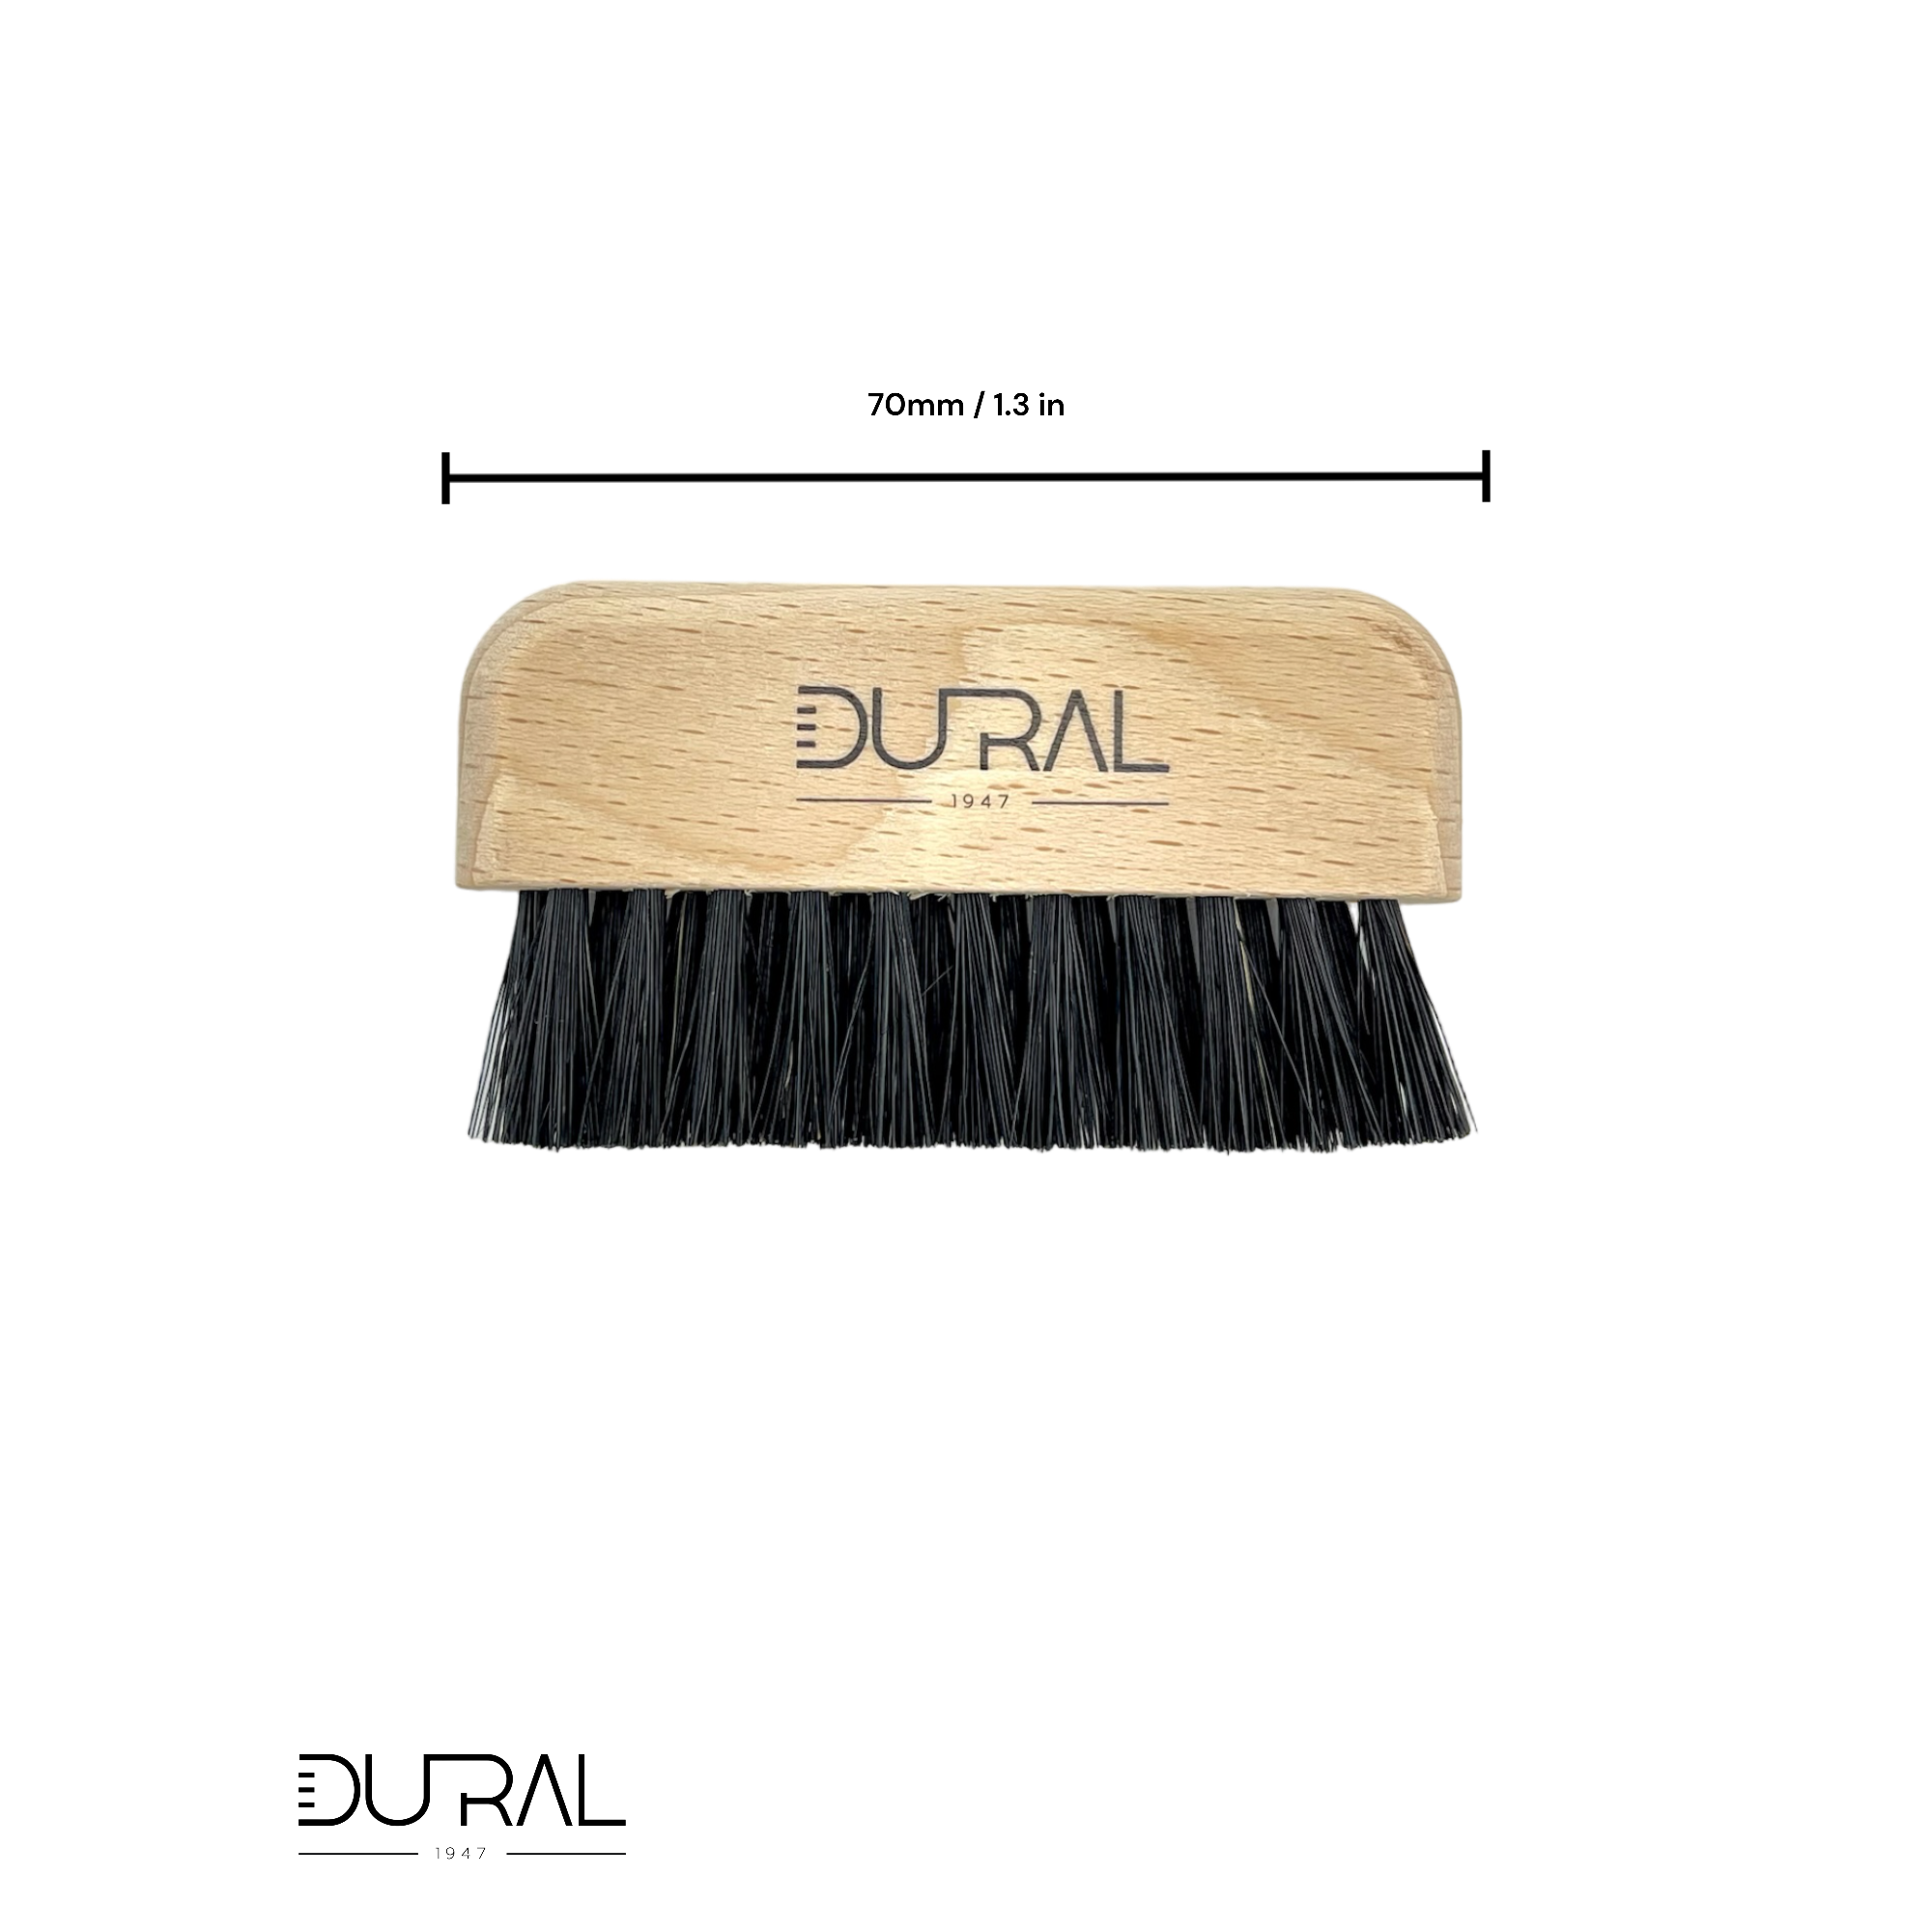 Dural Beech wood brush & comb cleaner with wild boar bristles